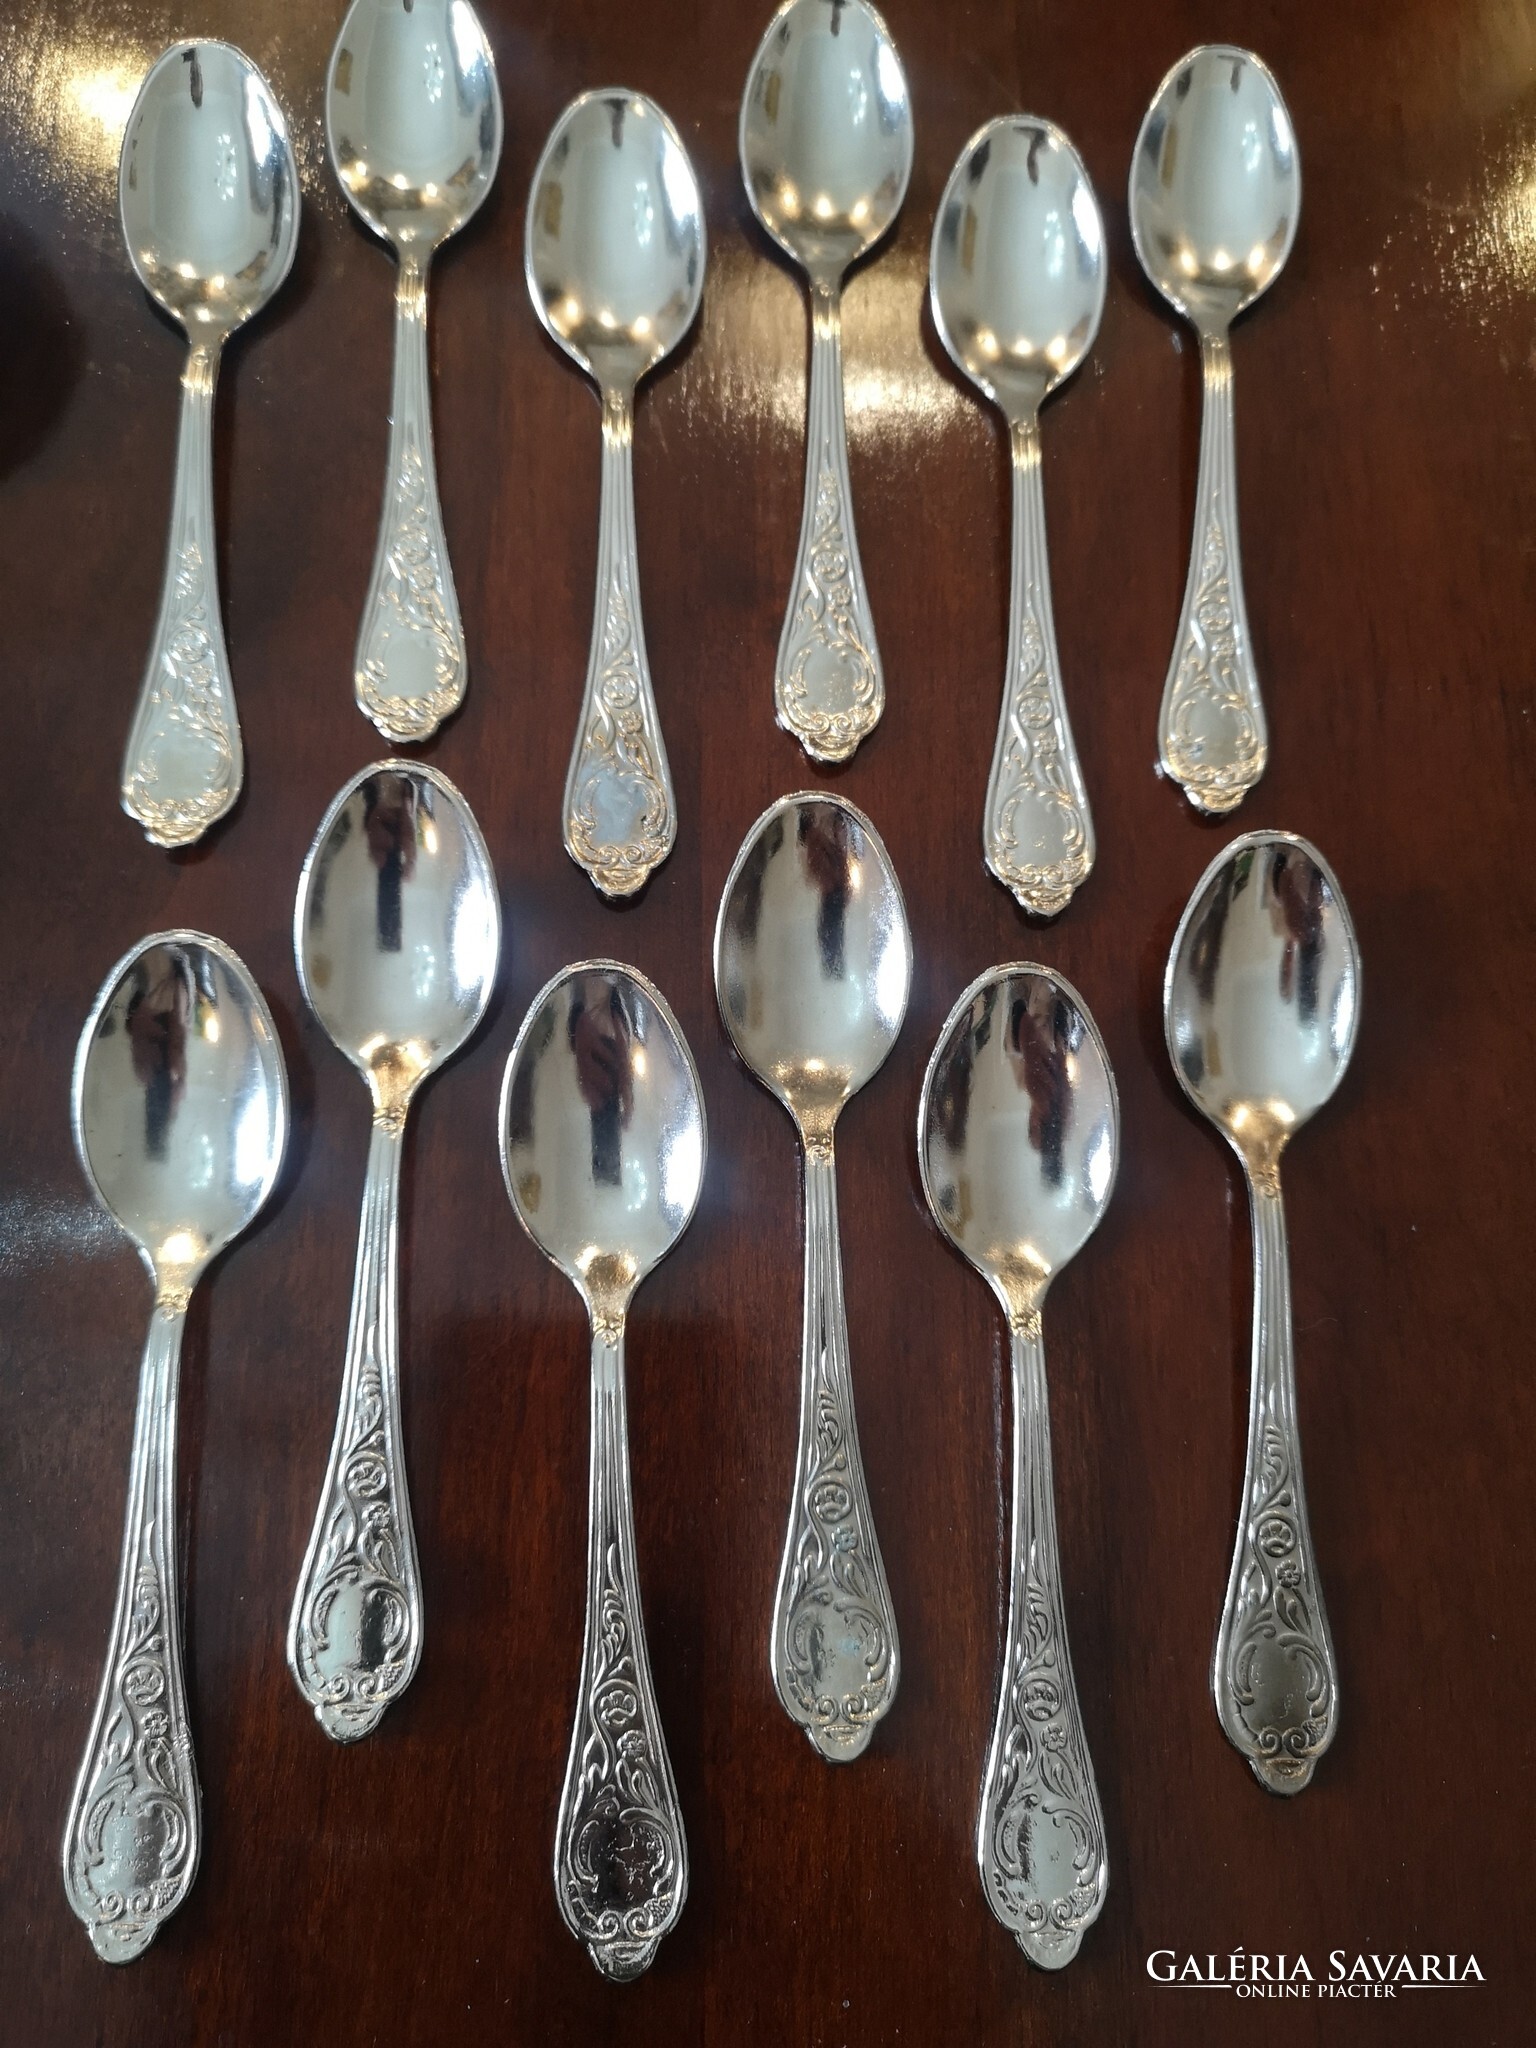 Silver-plated 12-person cutlery set arg 800 italy - Home, household  accessories | Galeria Savaria online marketplace - Buy or sell on a  reliable, quality online platform!